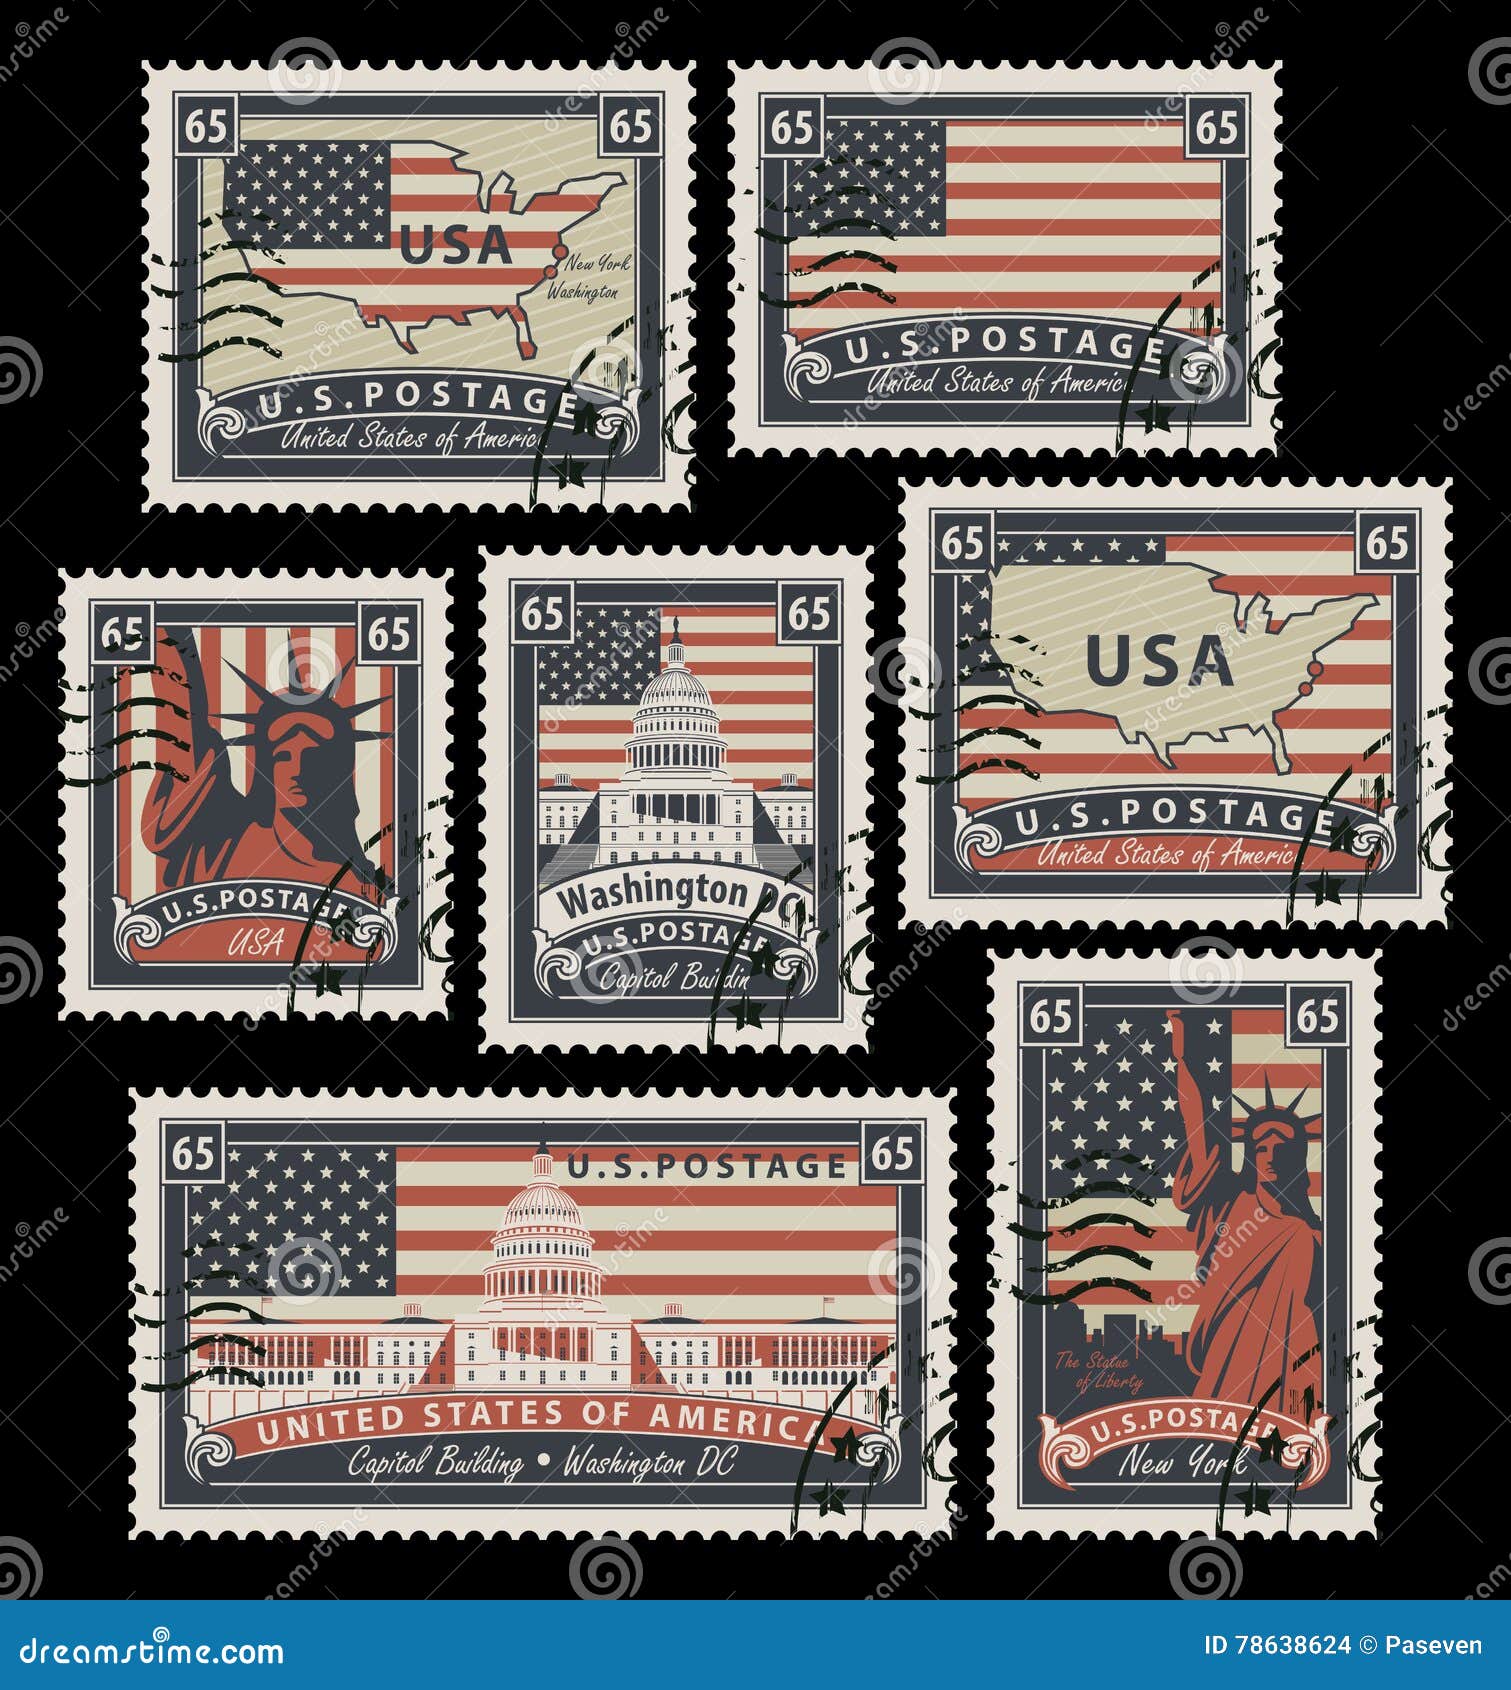 Stamps with America Landmarks Stock Vector - Illustration of currency,  landmarks: 78638624